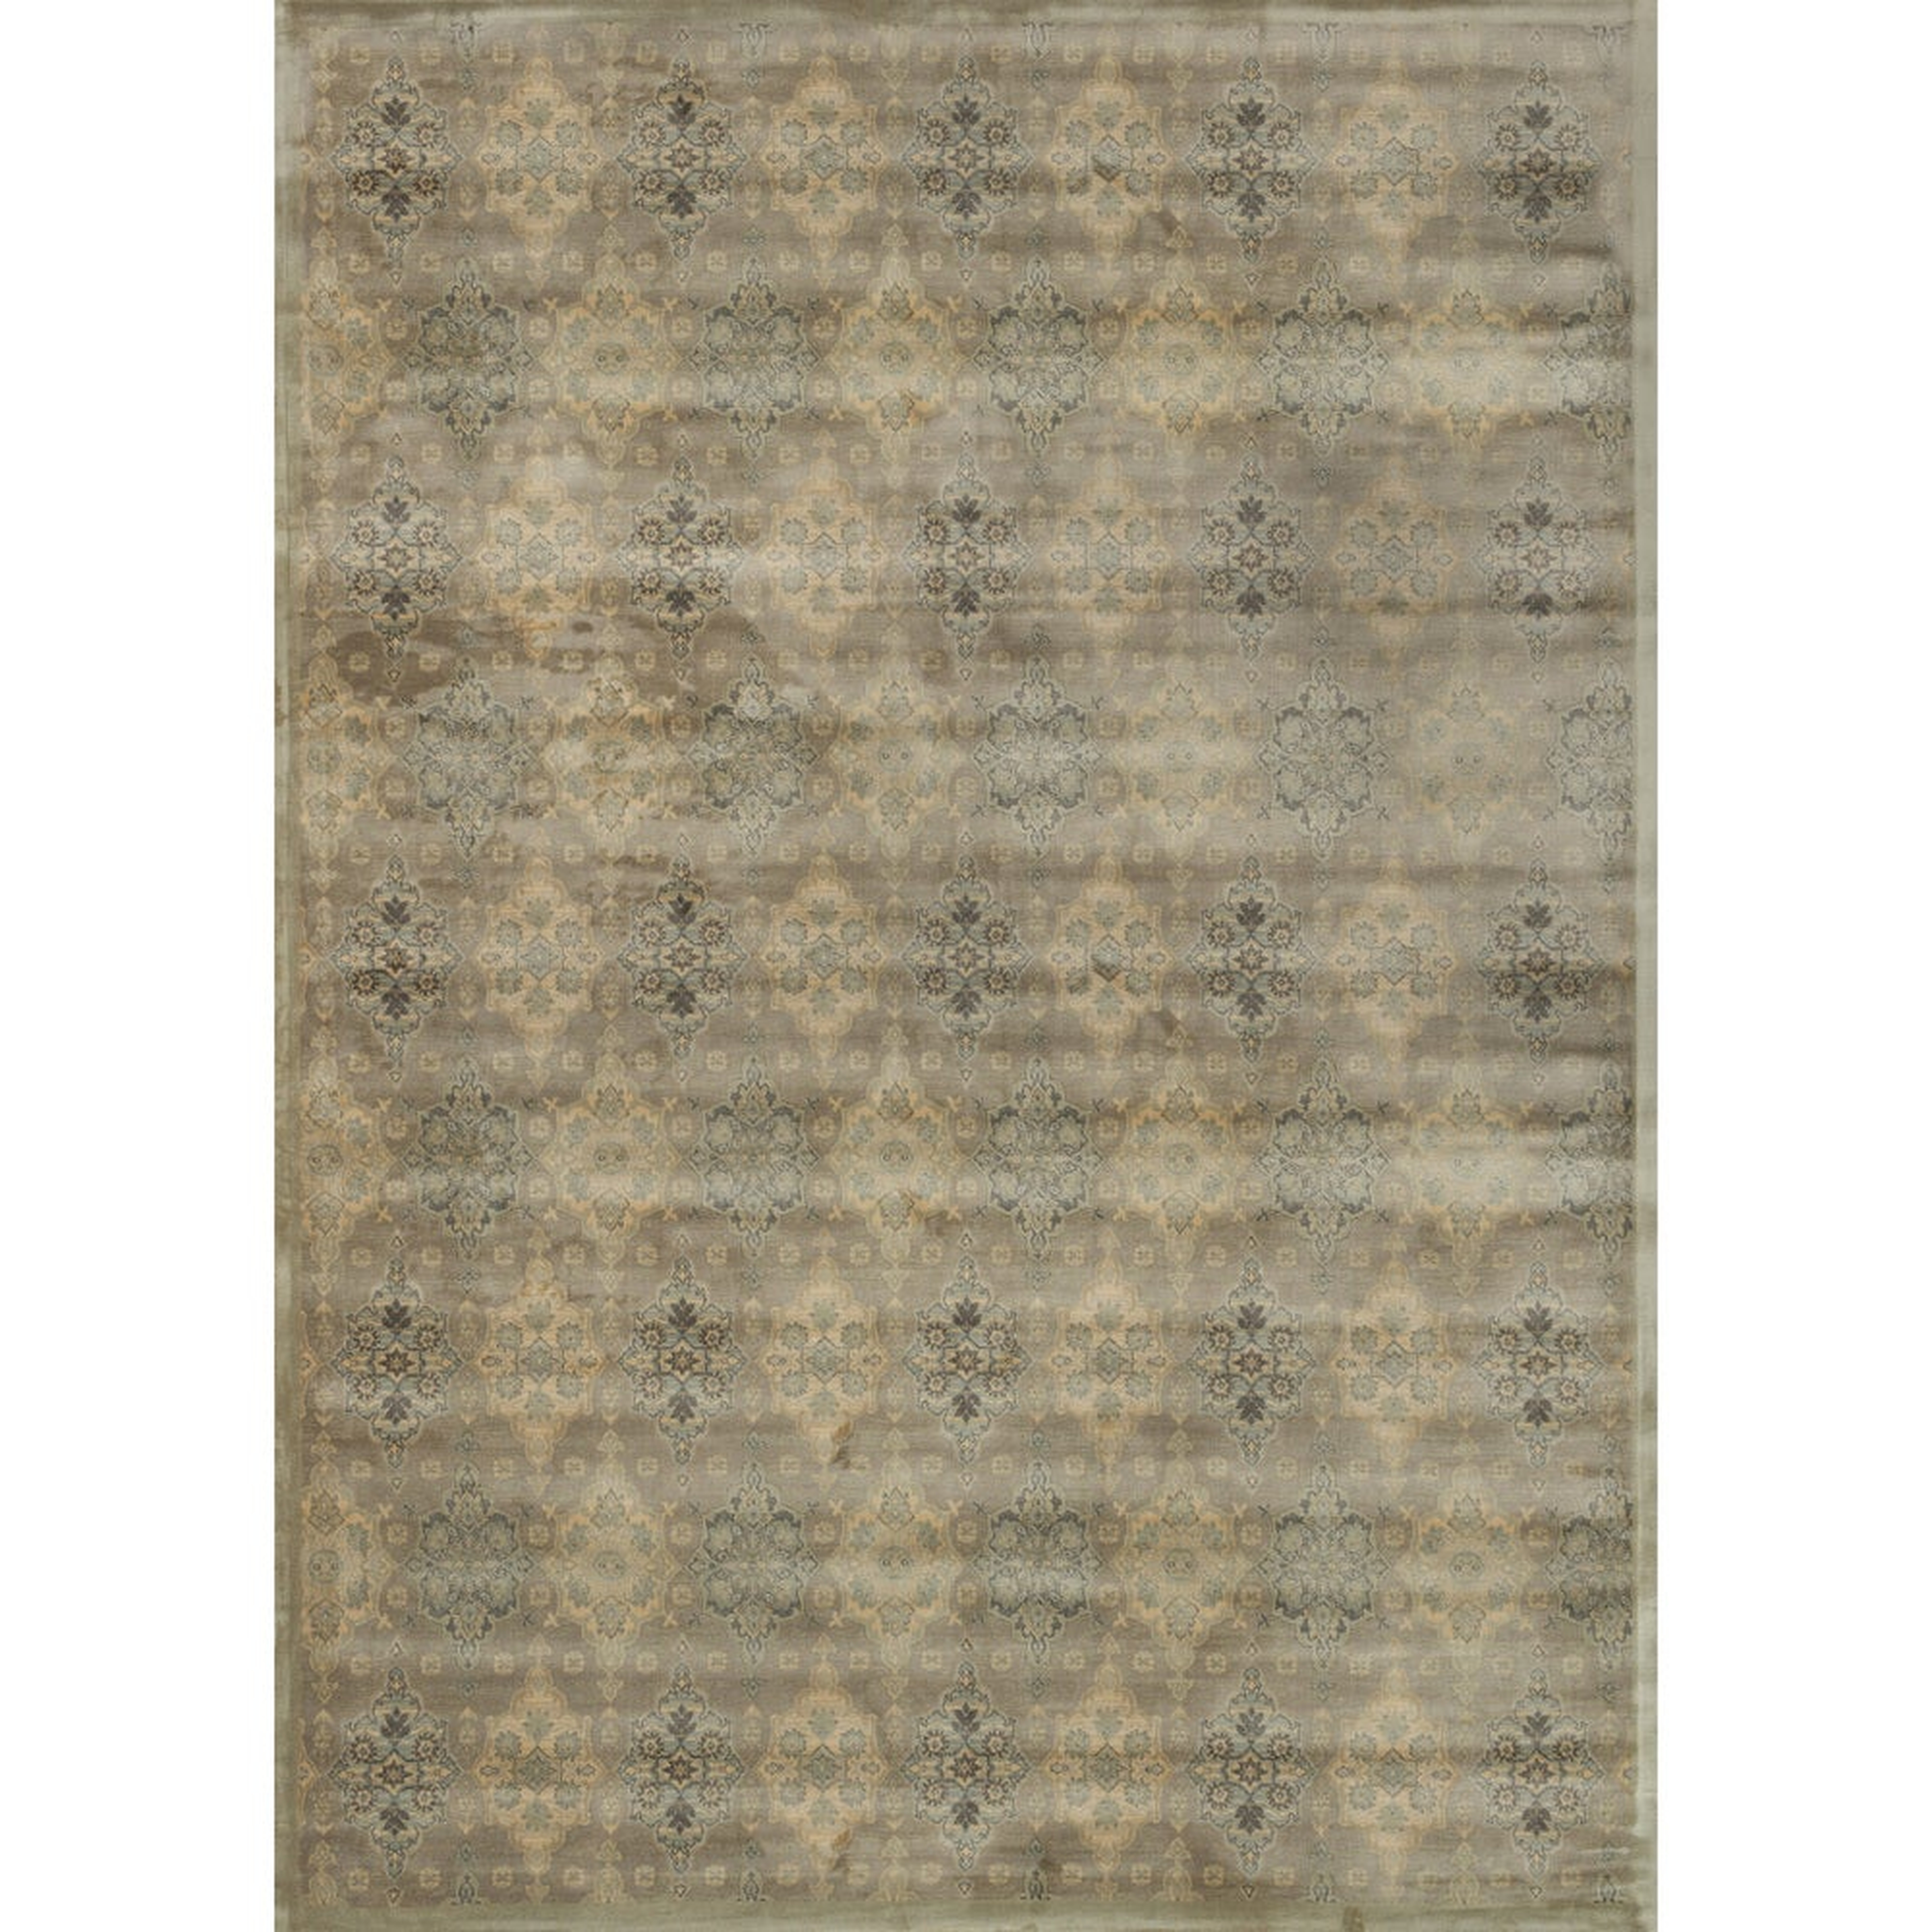 Alexander Home Natalie Traditional Distressed Gold Damask Rug - Taupe/Gold 12' x 15' - Overstock